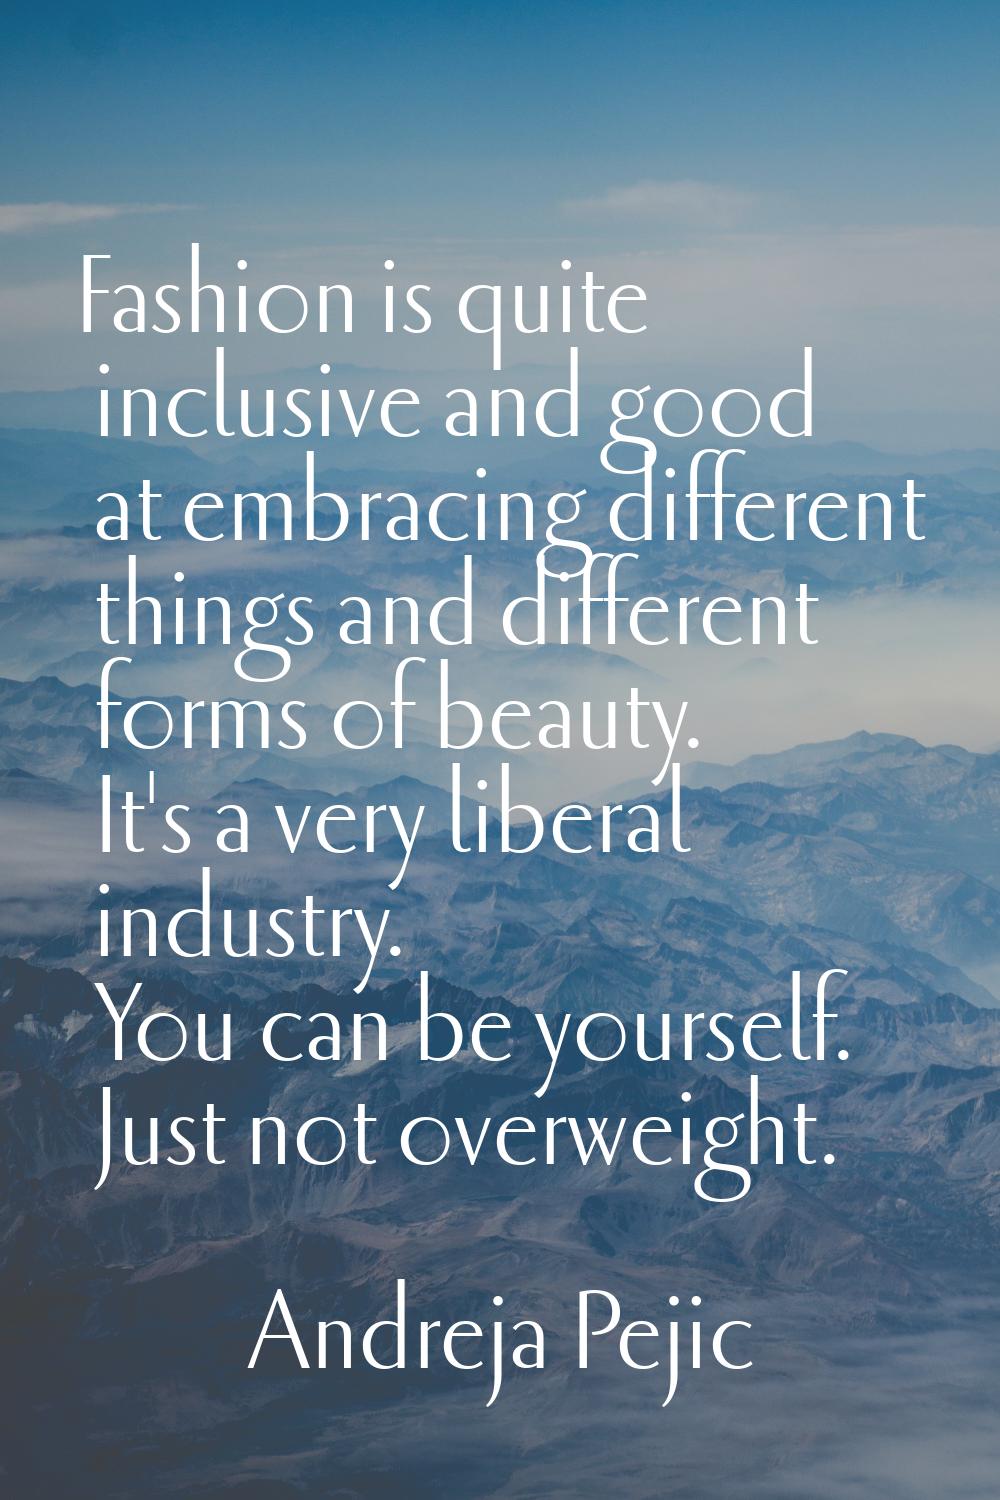 Fashion is quite inclusive and good at embracing different things and different forms of beauty. It